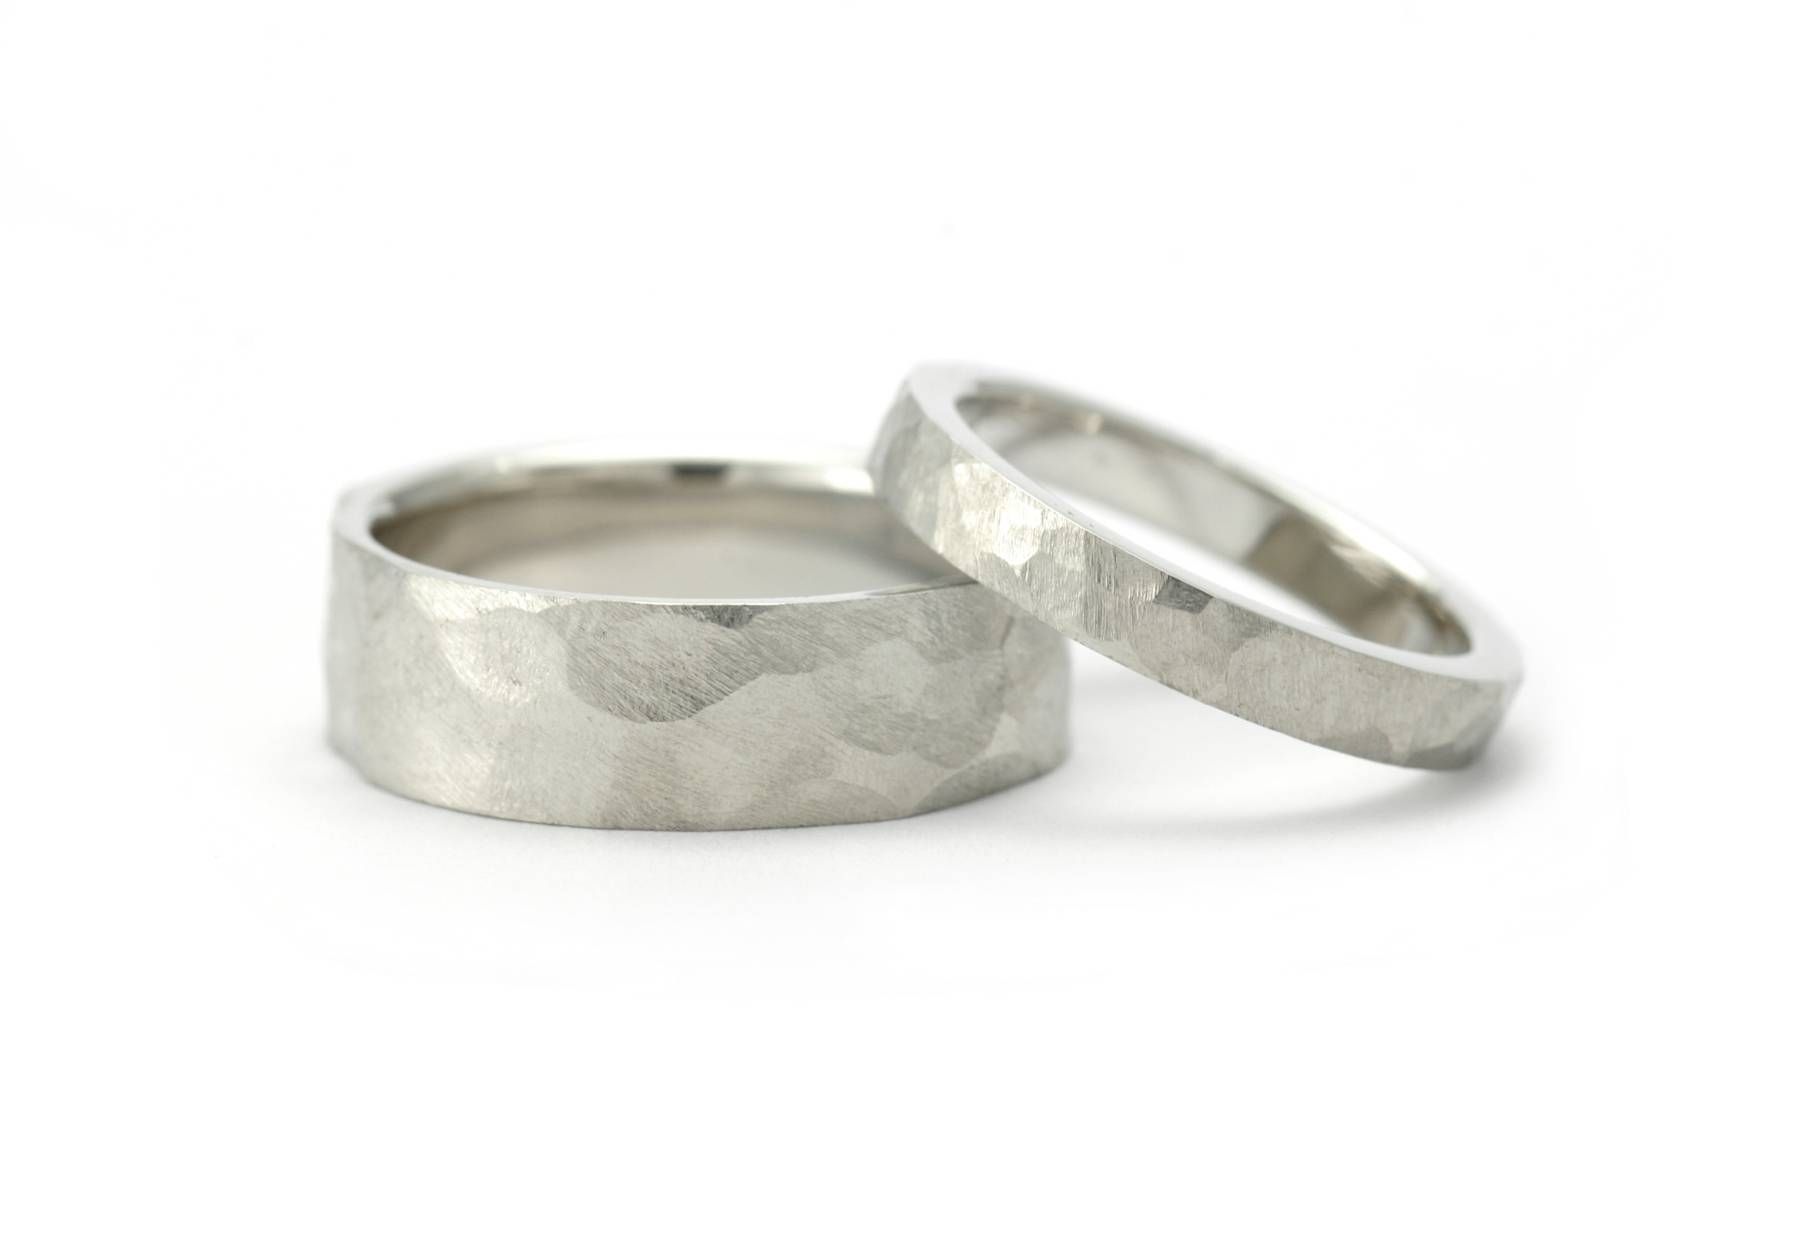 Men's And Women's Matching Wedding Band Sets – Mccaul Goldsmiths Within Men's And Women's Matching Wedding Bands (View 13 of 15)